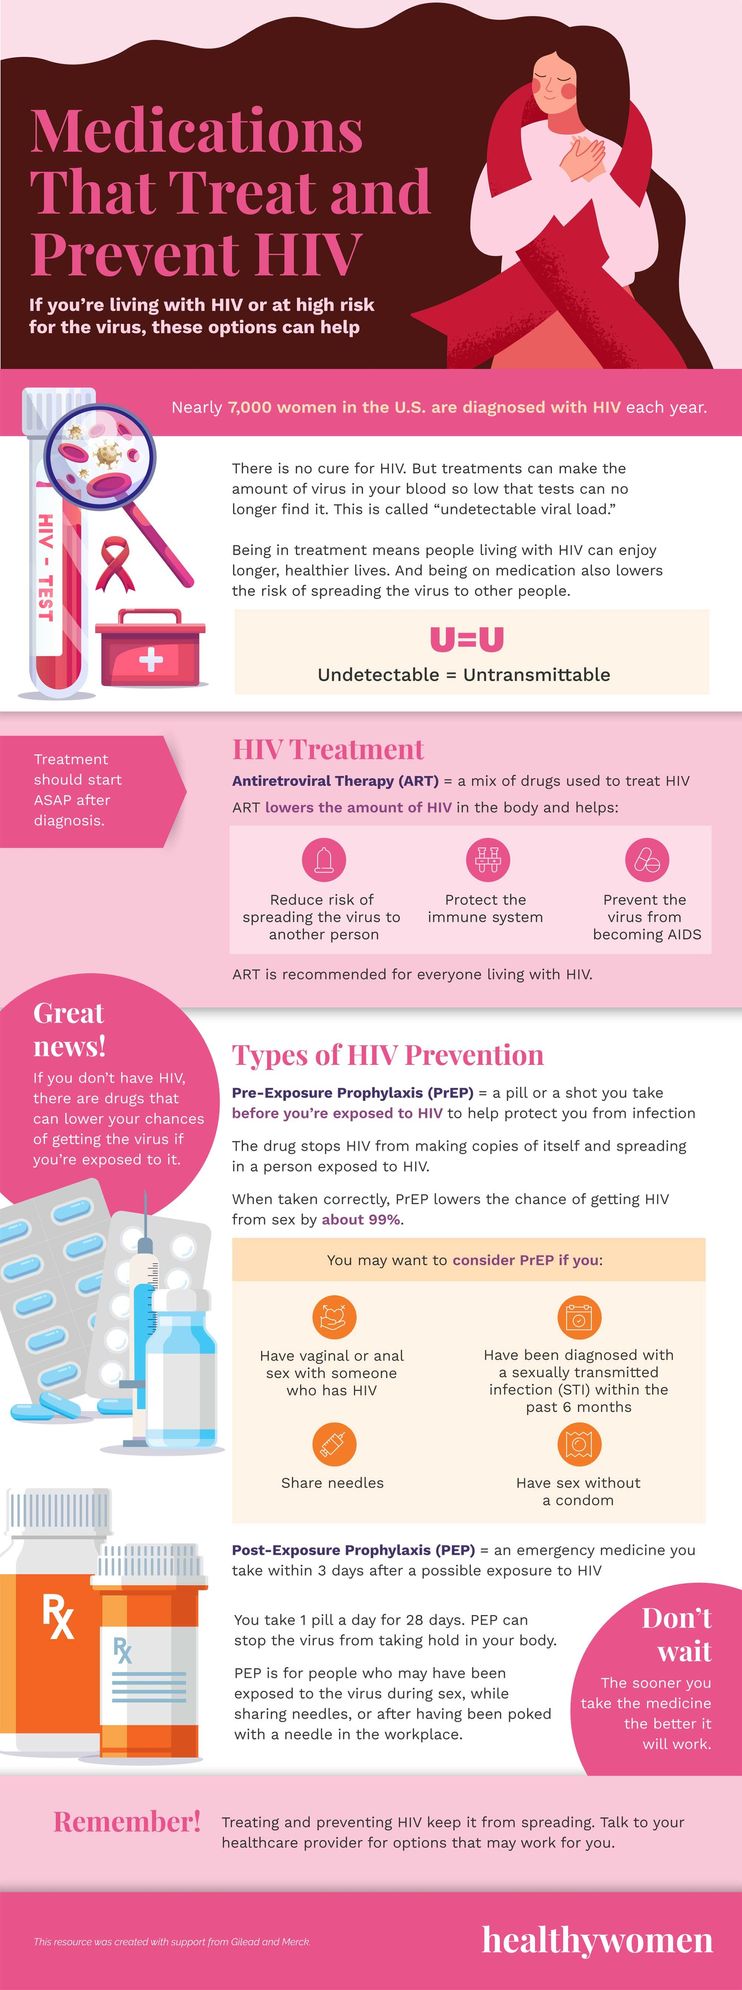 https://www.healthywomen.org/media-library/infographic-medications-that-treat-and-prevent-hiv-click-the-image-to-open-the-pdf.jpg?id=34344050&width=742&quality=85